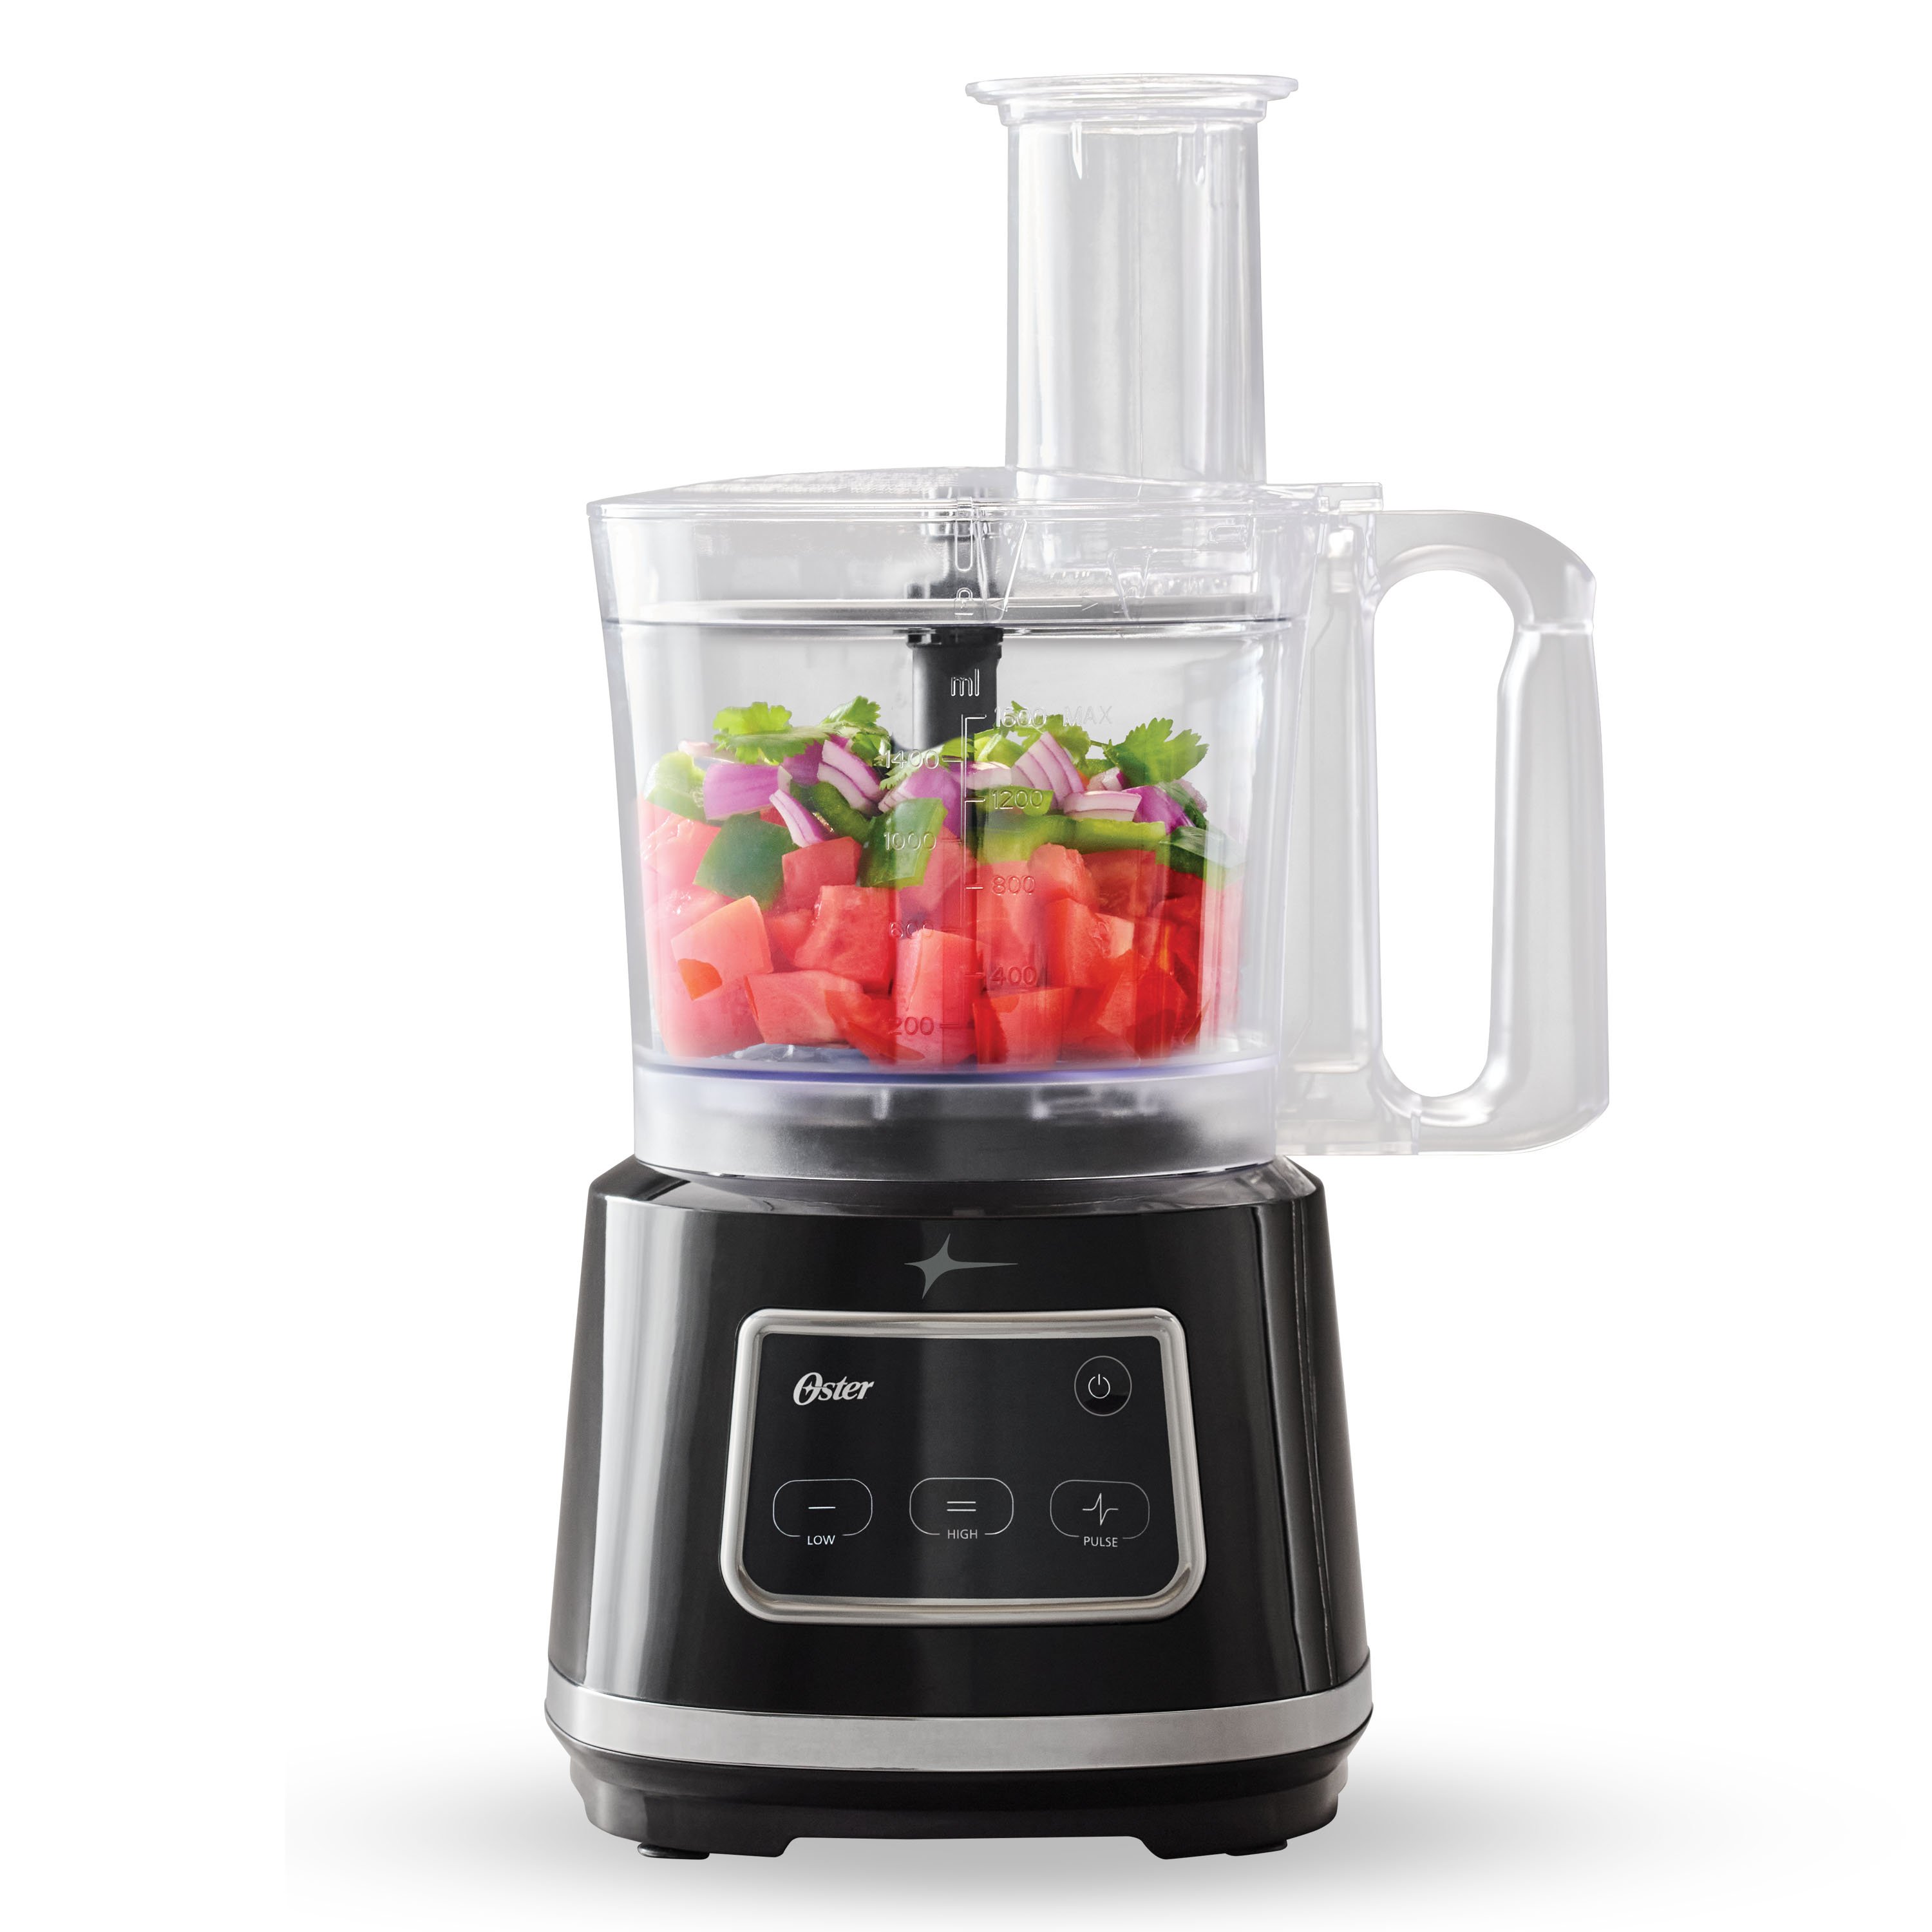 https://s7d9.scene7.com/is/image/NewellRubbermaid/DC_31964_Oster_2021_Innovation_MrProcessor_ChildProject_10CupFoodProcessor_EasyTouchTechnology_Enhanced_ATF_1